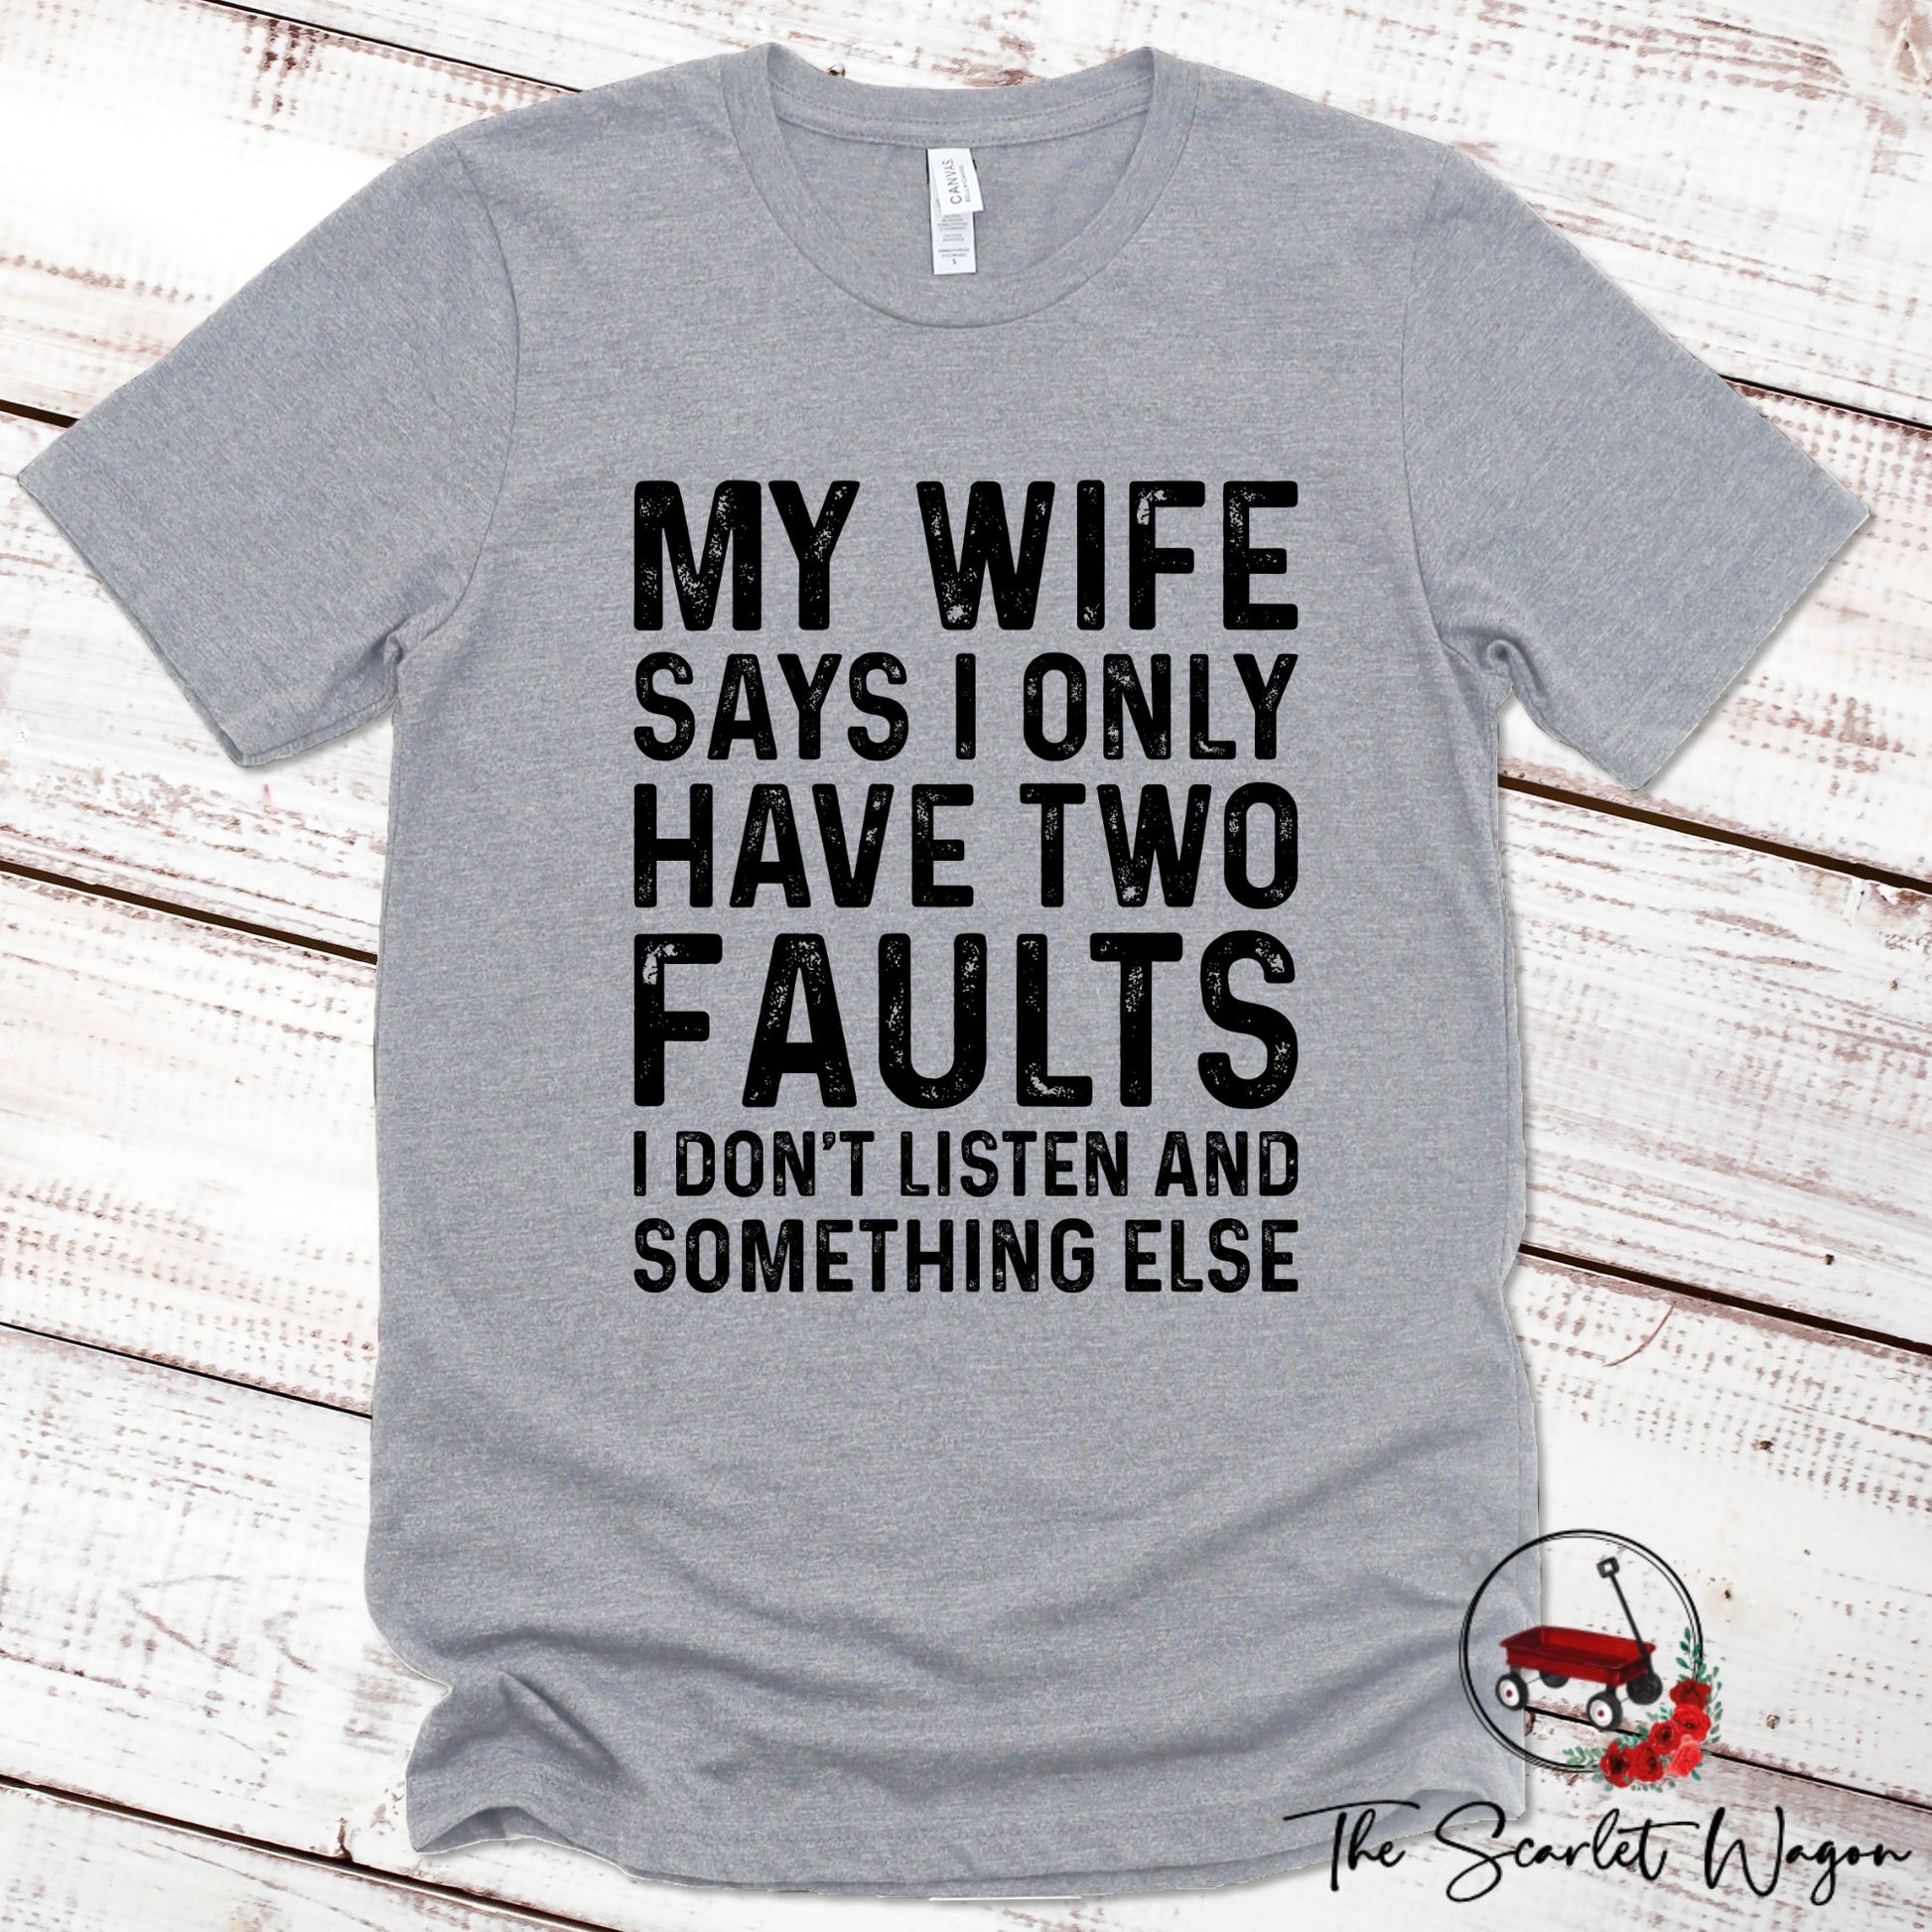 My Wife Says I Have Two Faults Premium Tee Scarlet Wagon Athletic Heather XS 